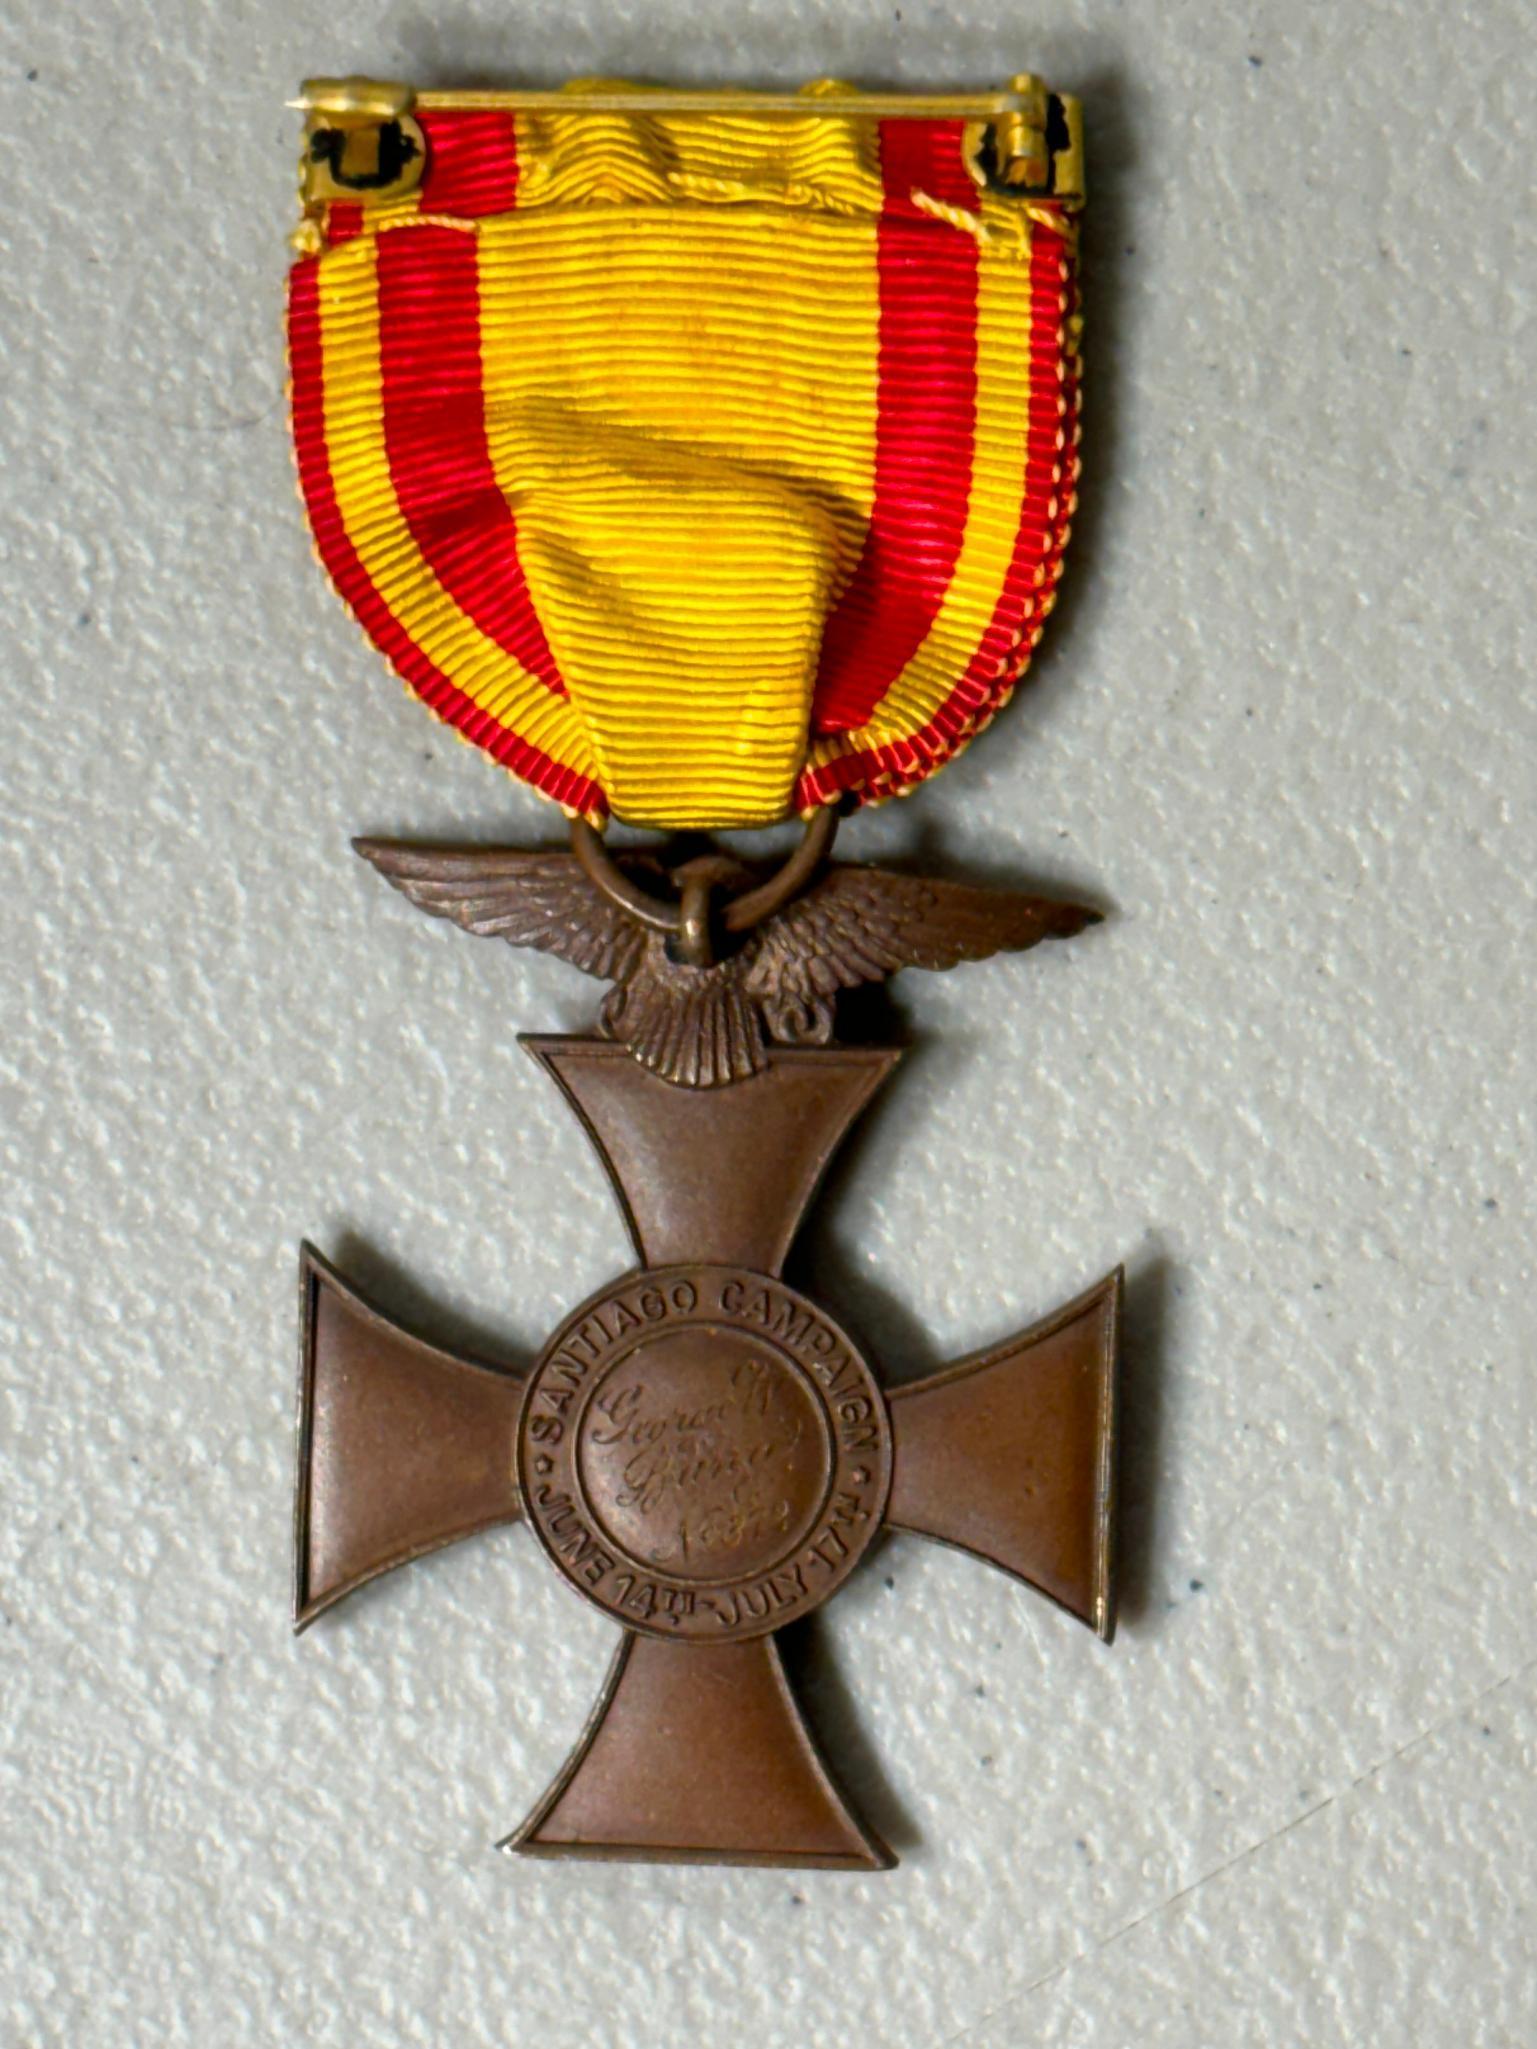 SOCIETY OF ARMY OF SANTIAGO MEDAL No. & ENGRAVED